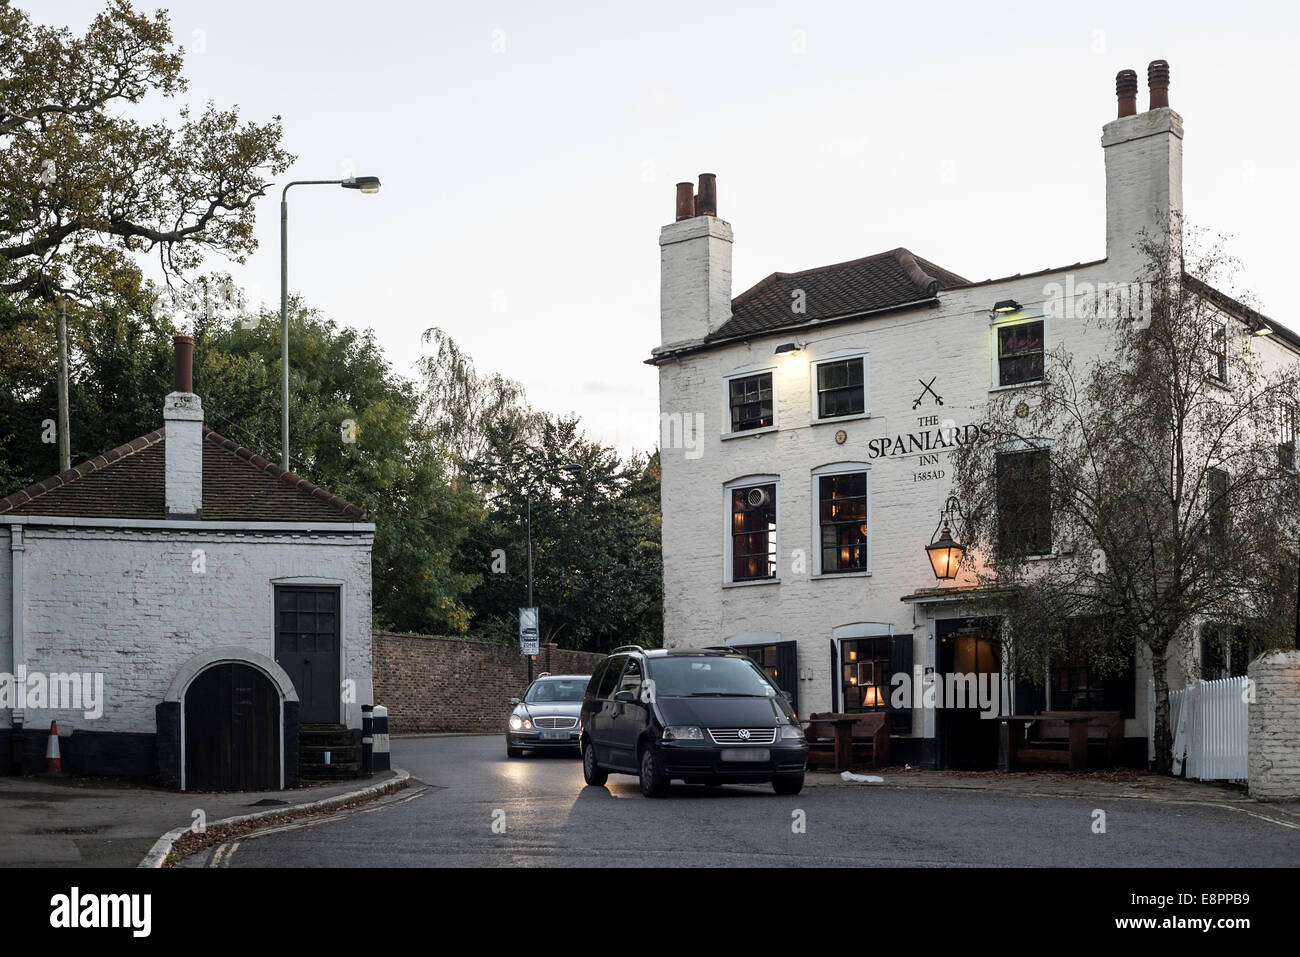 LONDON, UK - OCT 11: The Spaniards Inn on the right and the tollhouse on the left in Hampstead in London on October 11, 2014. Stock Photo